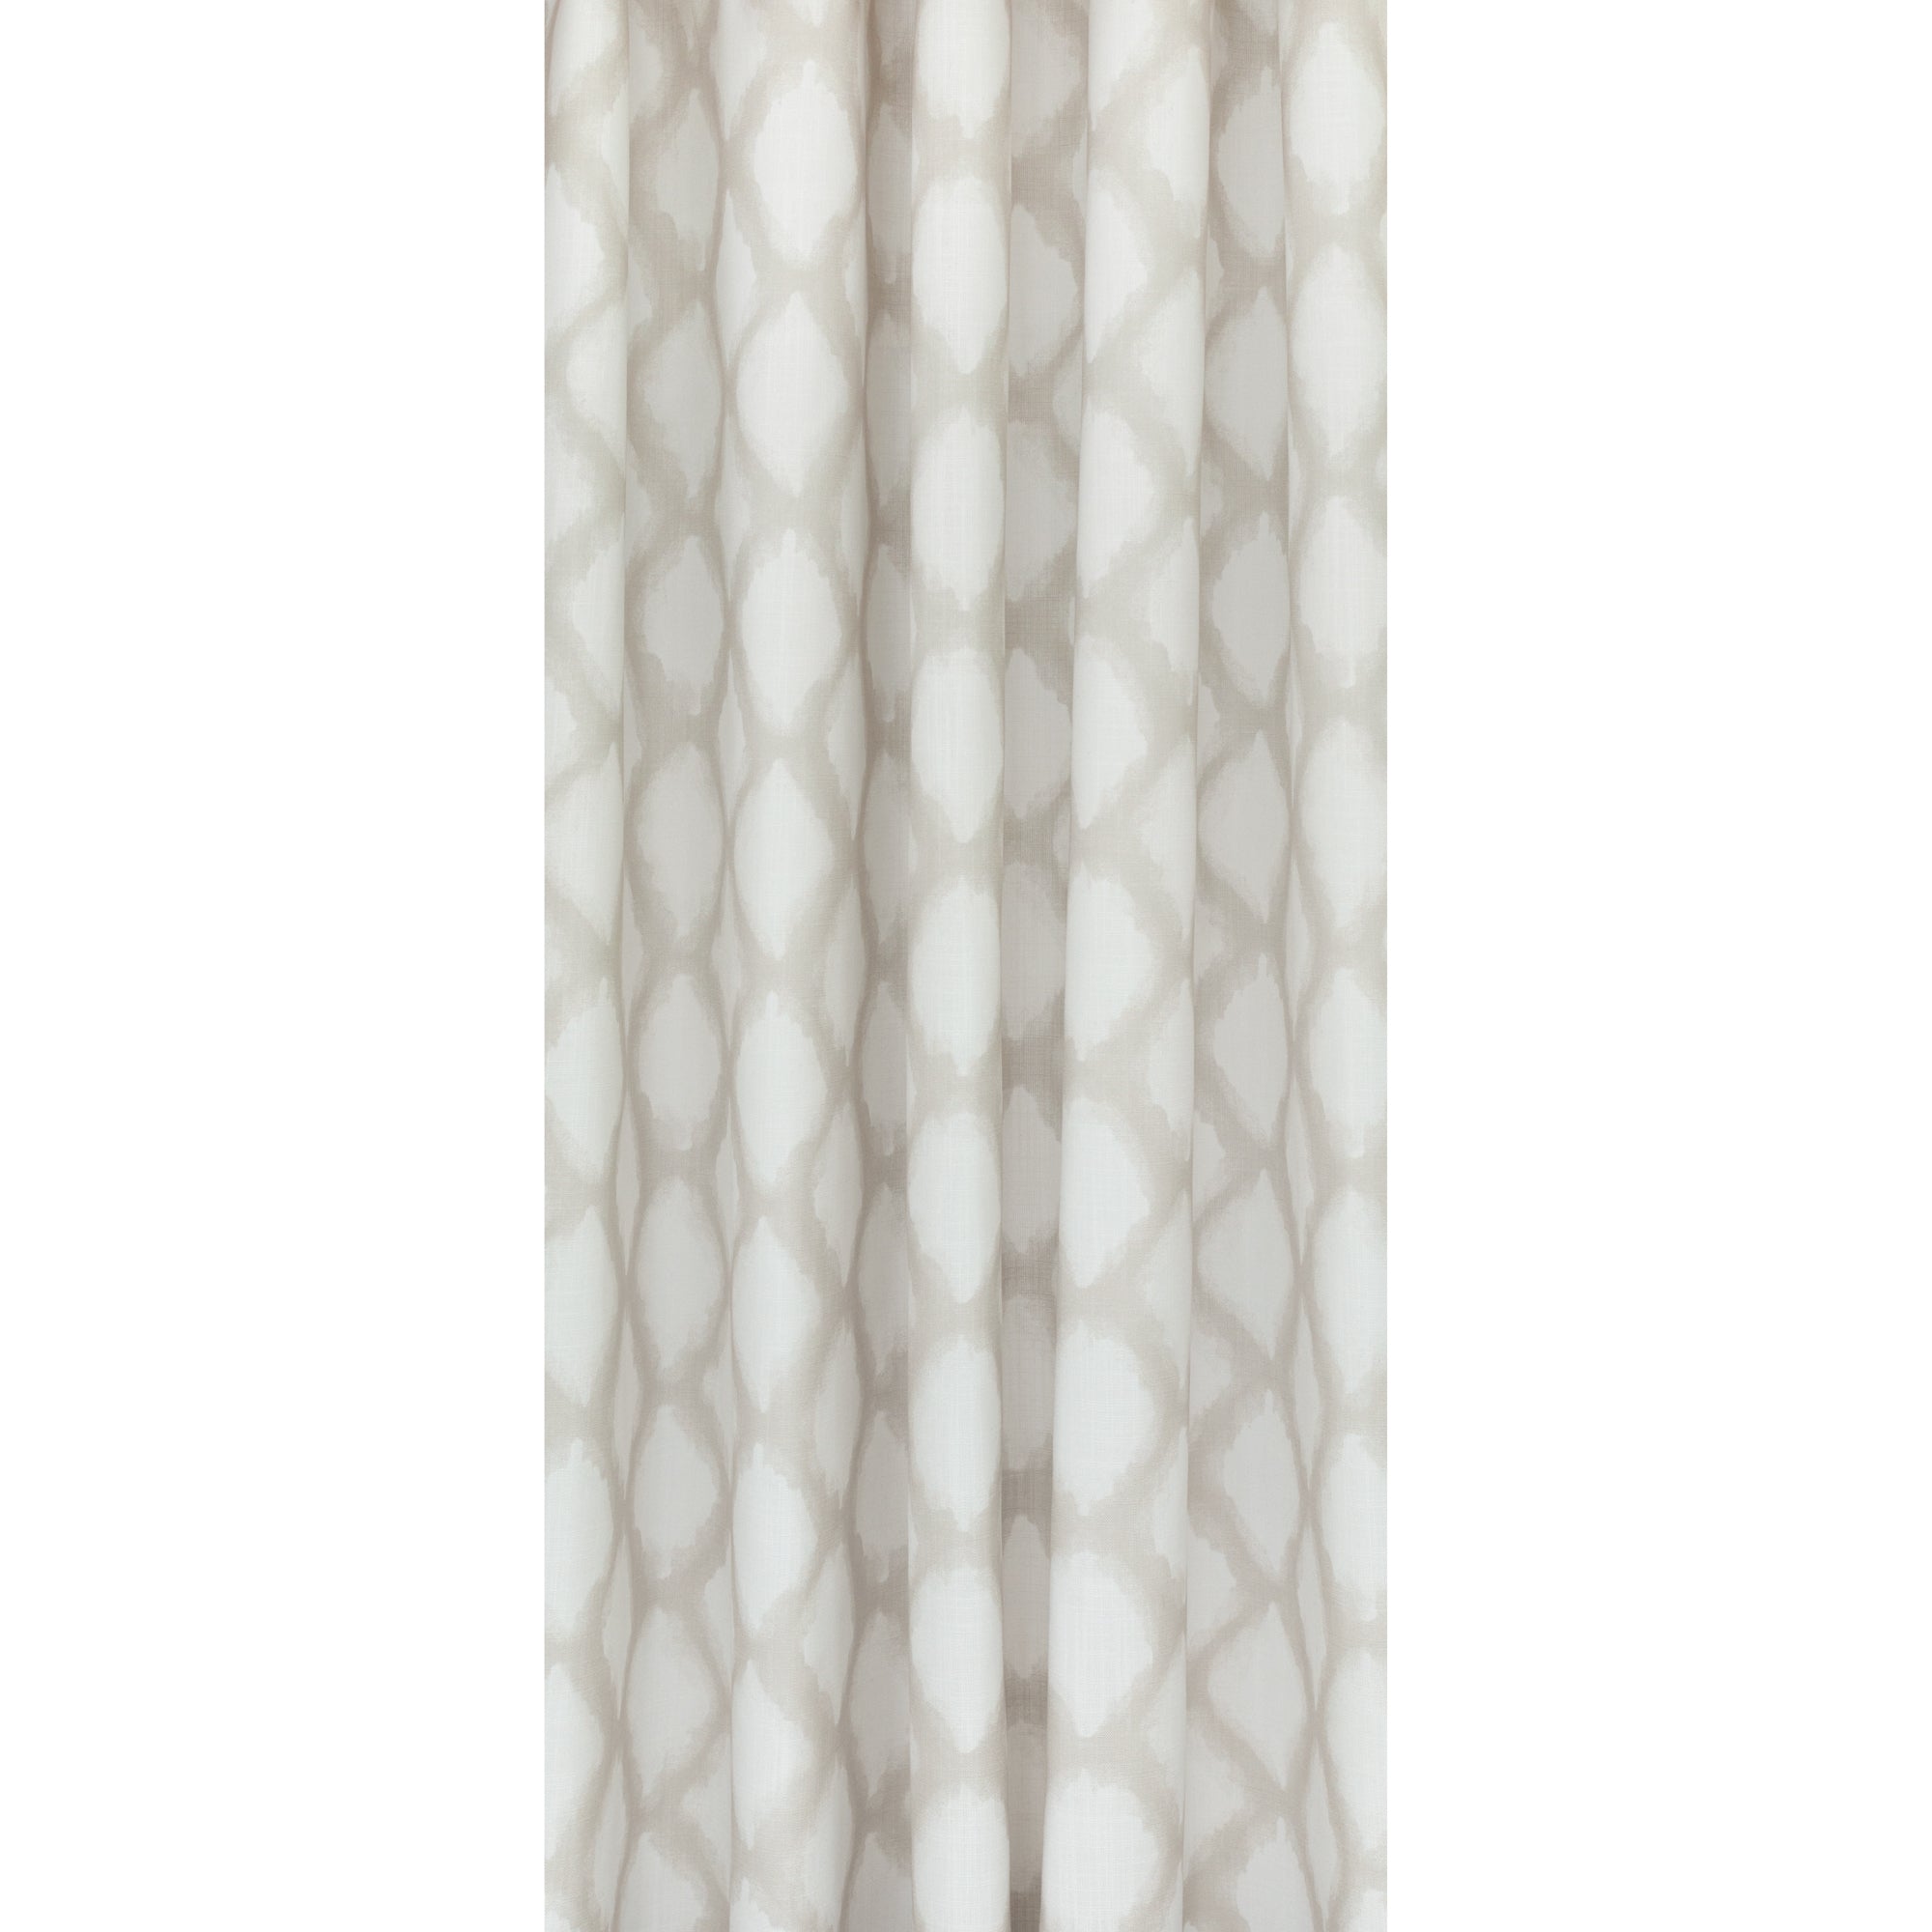 Melrose Sand, a beige and white ikat print fabric : view 7